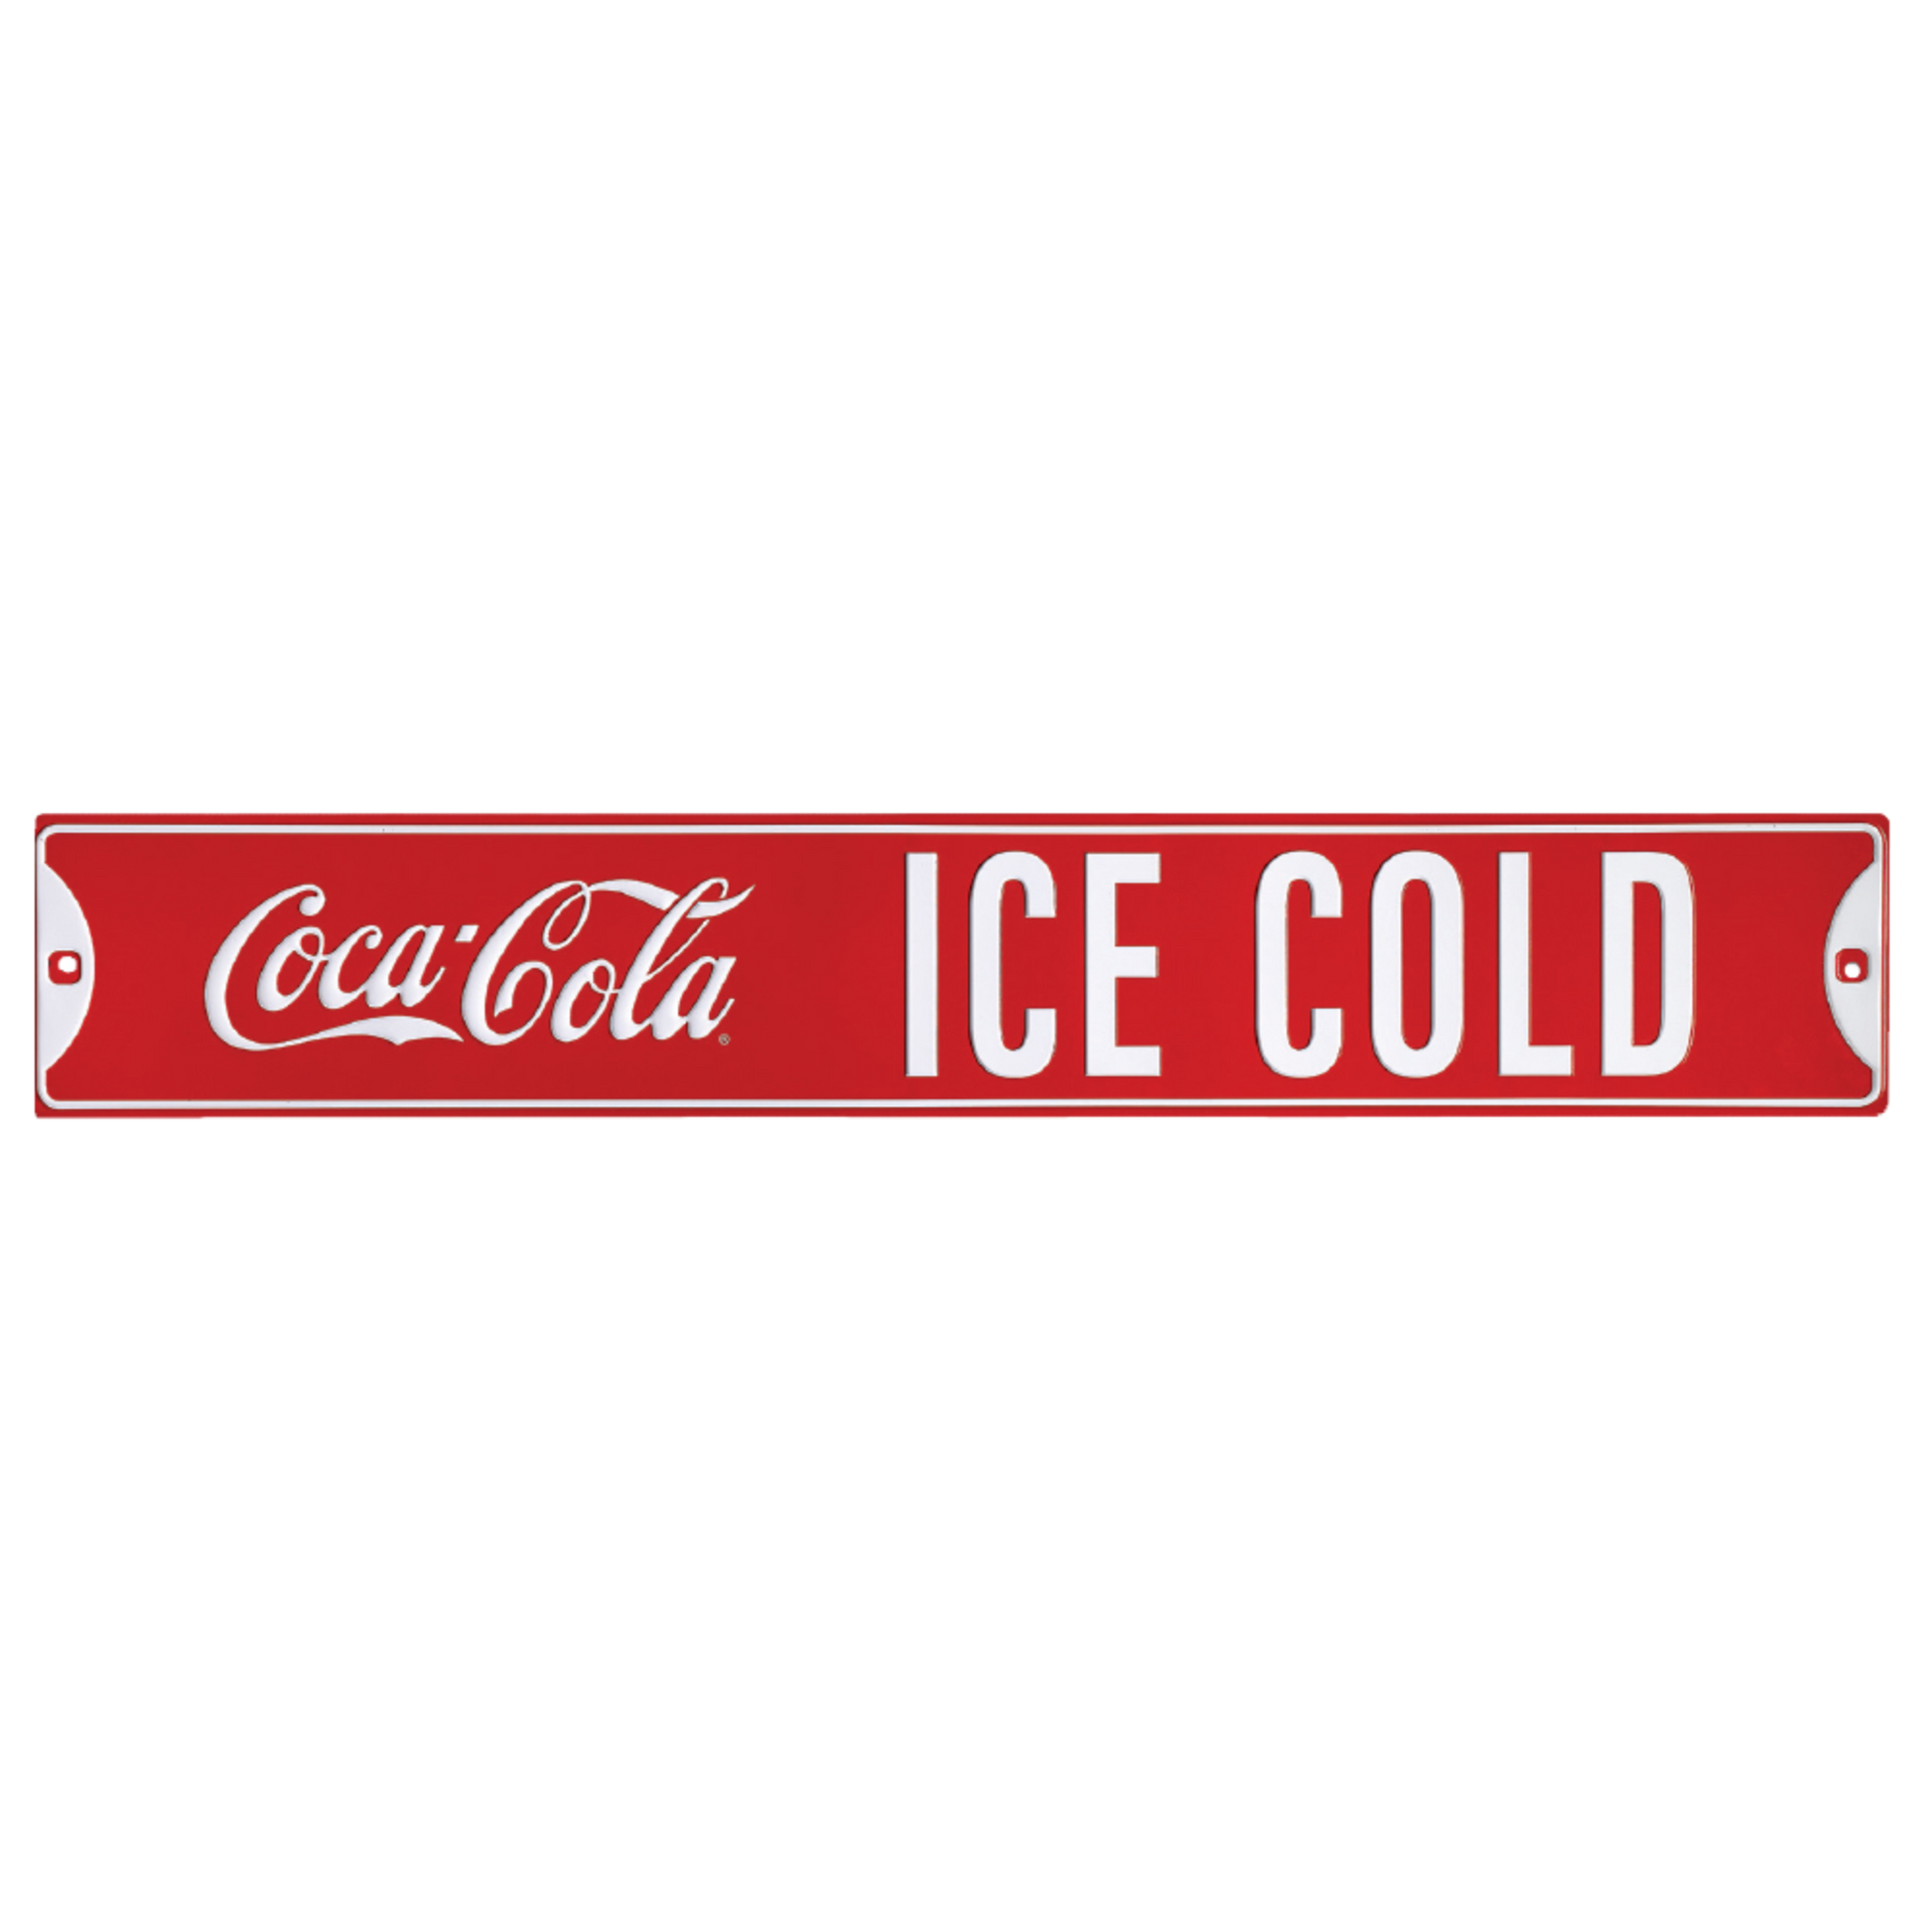 Vintage-inspired red Coca-Cola 'ICE COLD' street-style tin sign.